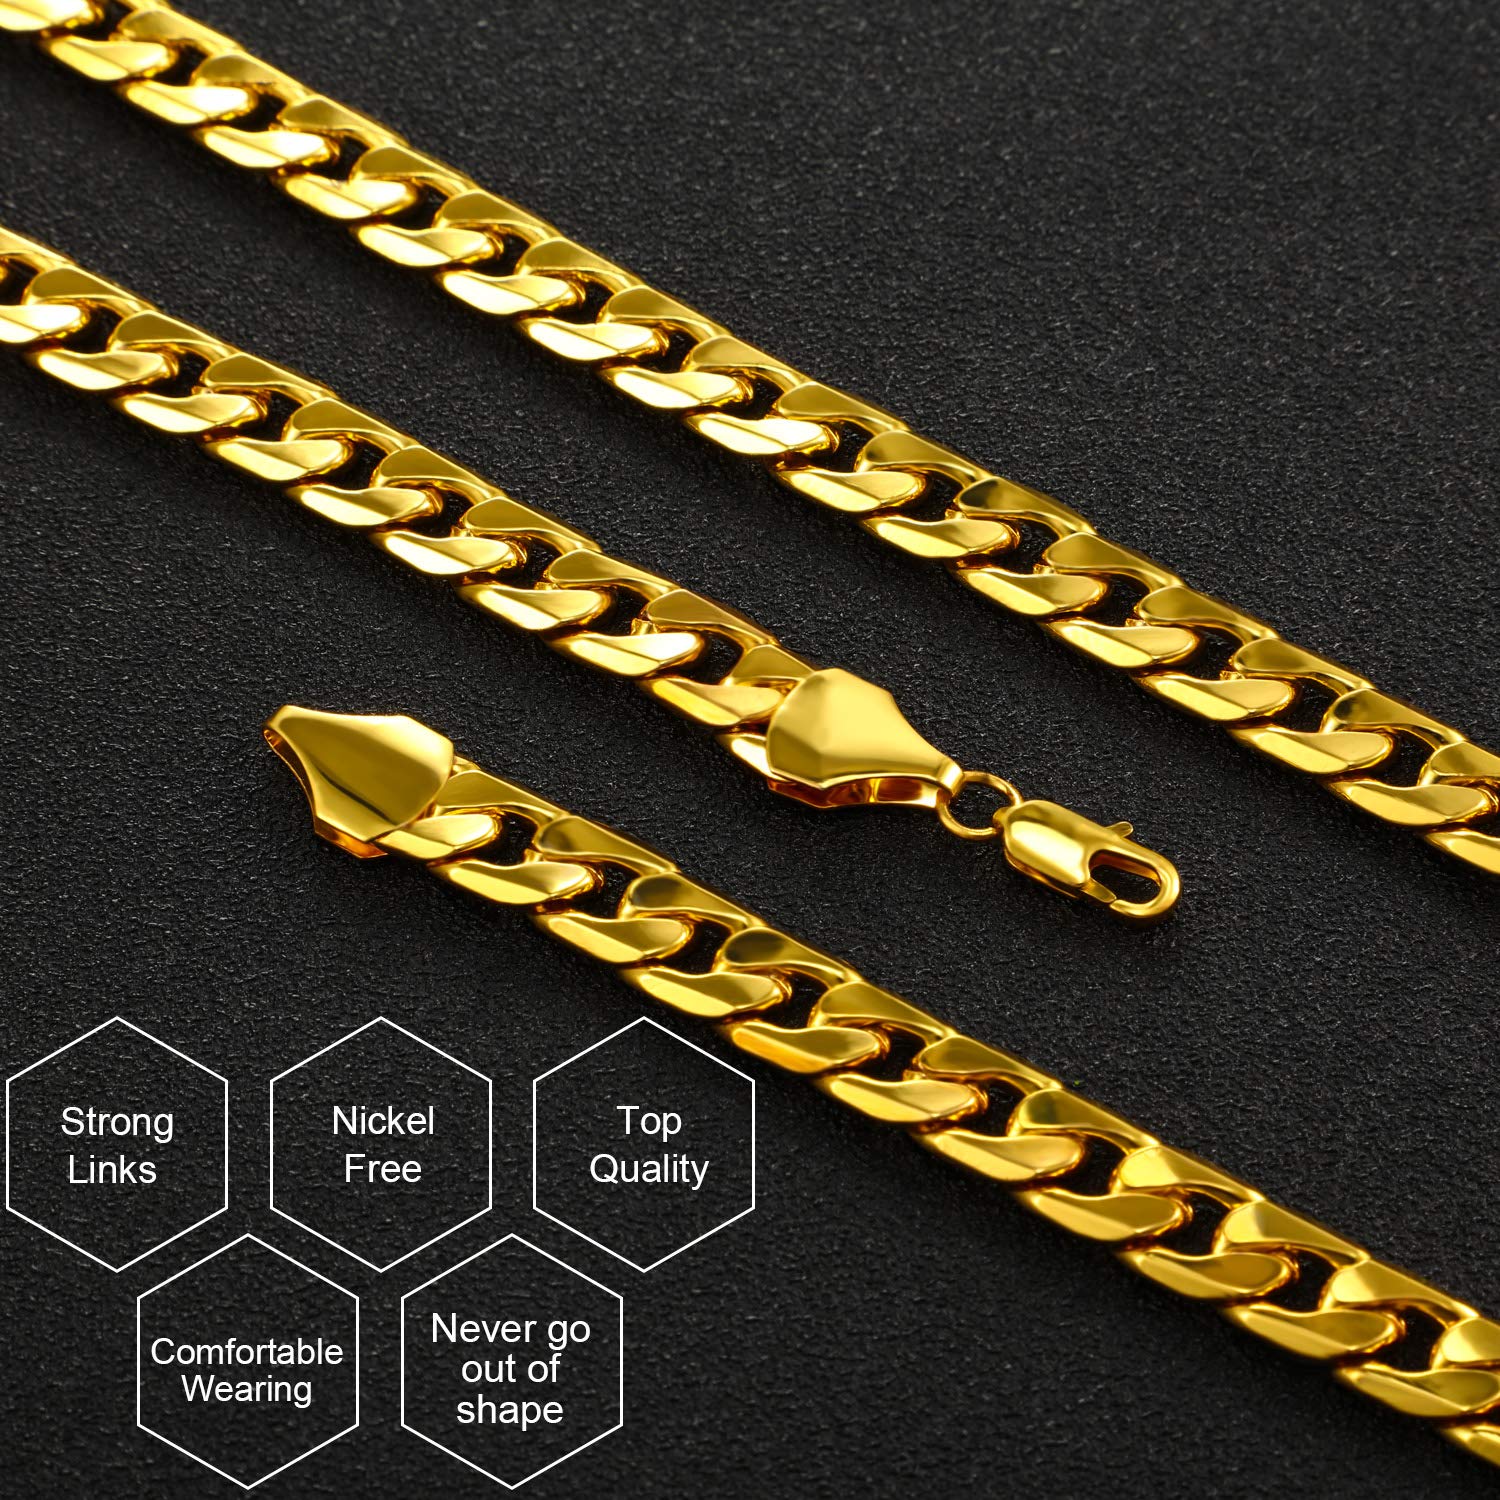 4 Pieces Hip Hop Rapper Faux Gold Chain Necklace Chunky Necklace Stainless Steel Chain for 80's, 90's Punk Style Hip Hop Chain Necklace, 8 MM 24 Inch Long